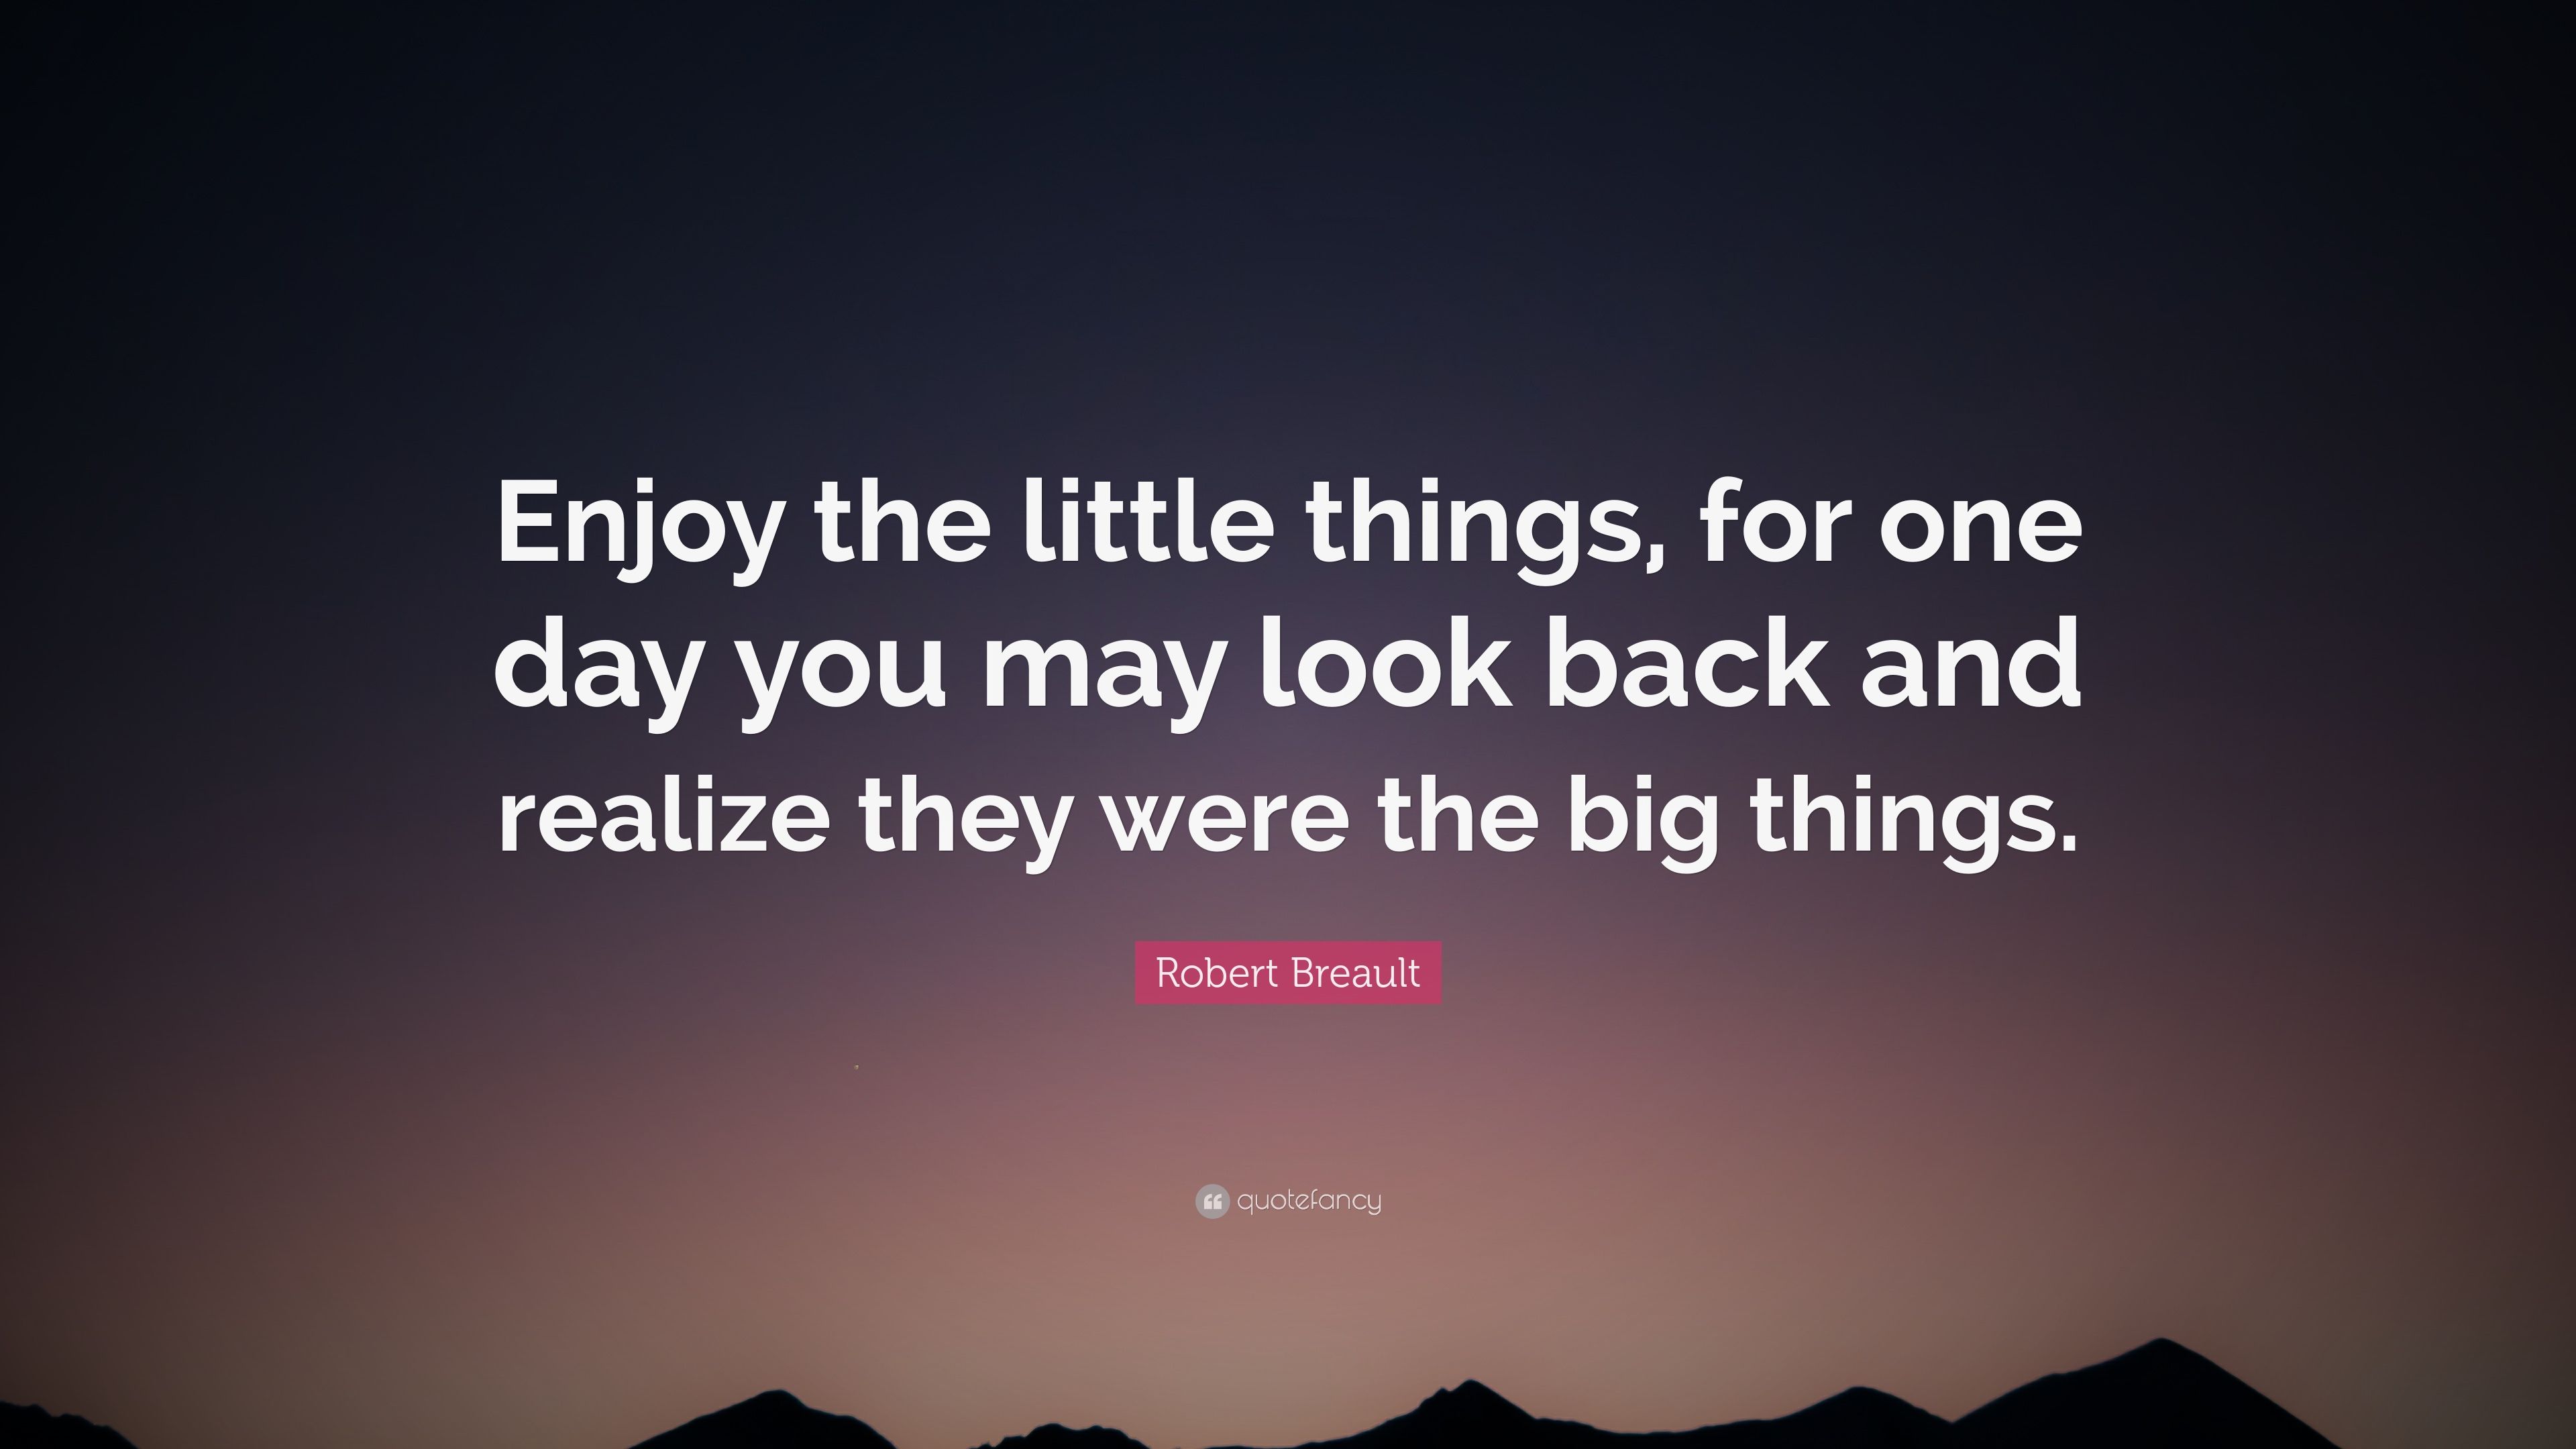 Robert Breault Quote: “Enjoy the little things, for one day you may look back and realize they were the big things.” (12 wallpaper)